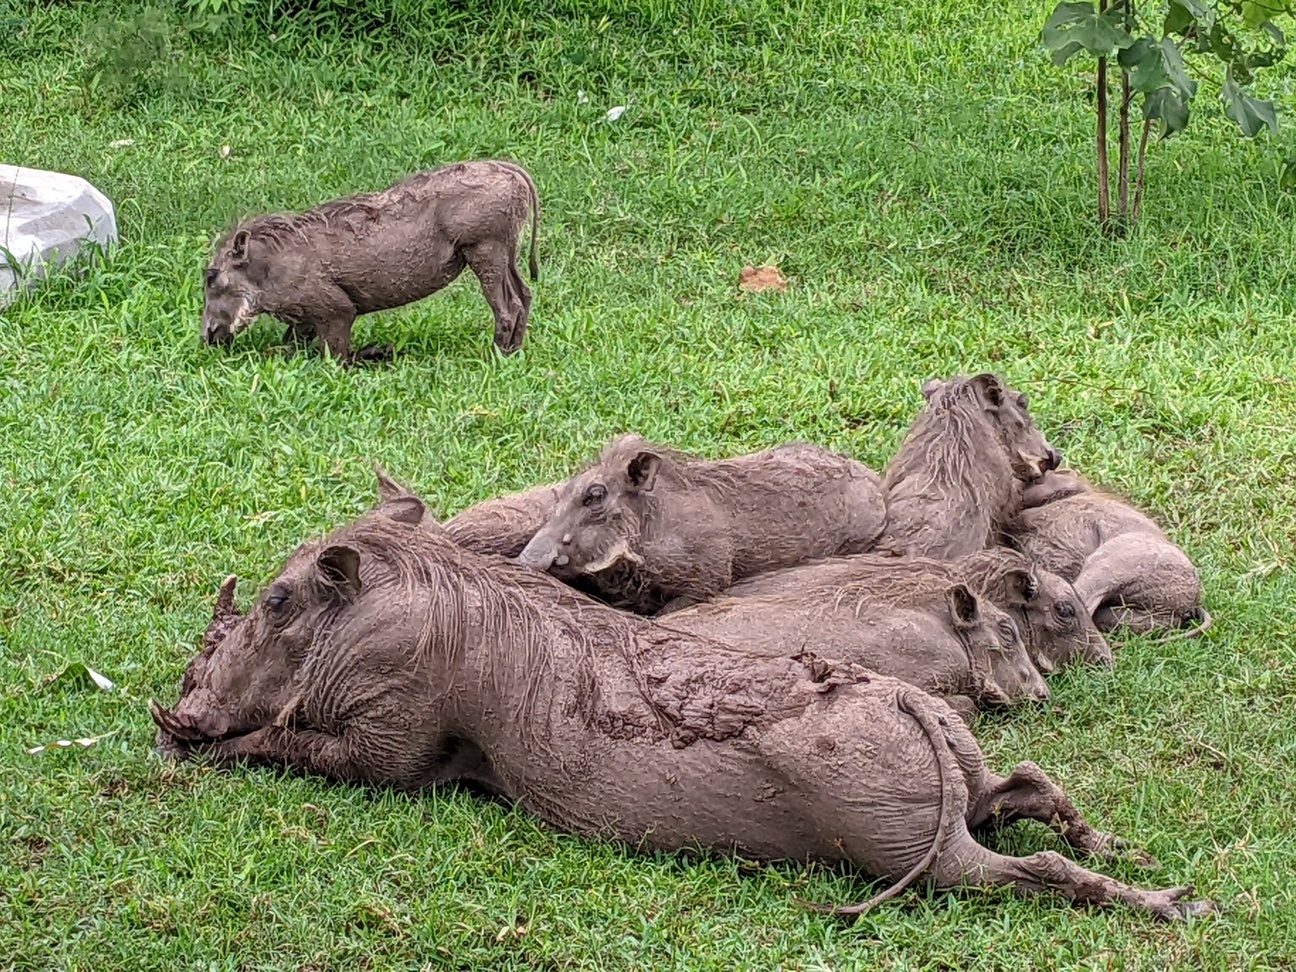 Trip Diary: Tenderness in Warthogs